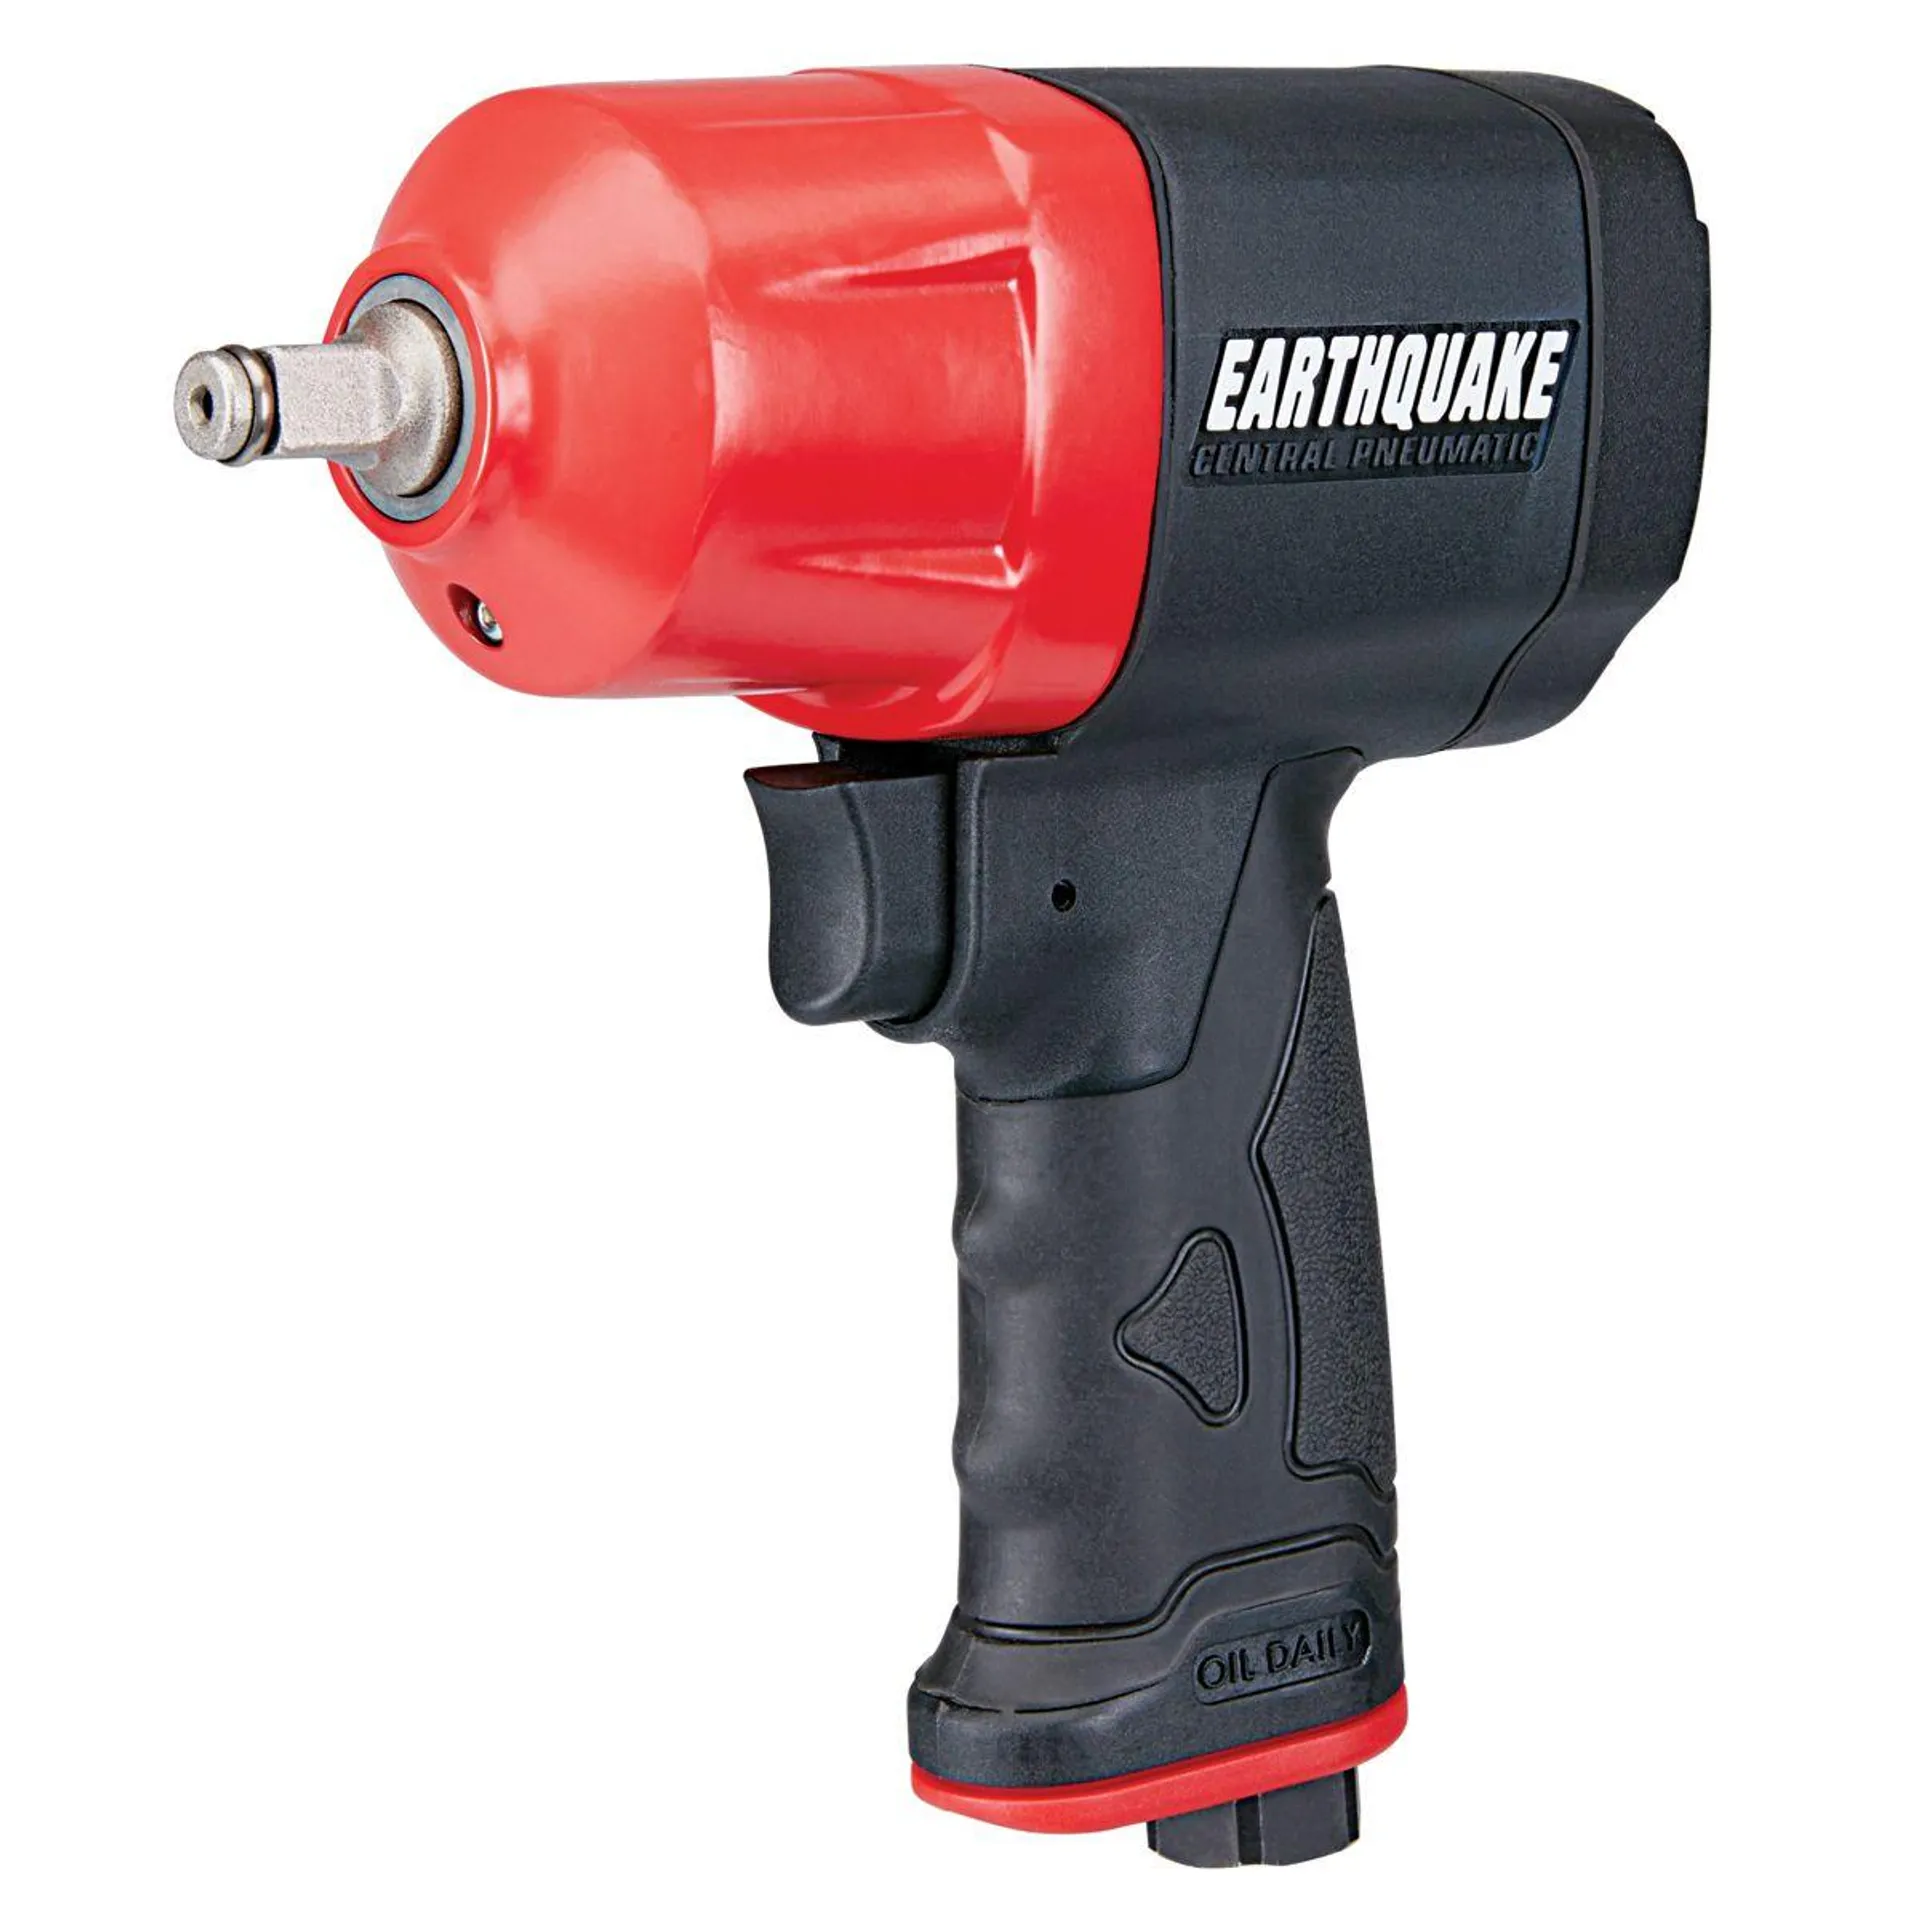 EARTHQUAKE 3/8 in. Composite Air Impact Wrench, Twin Hammer, 450 ft. lbs.